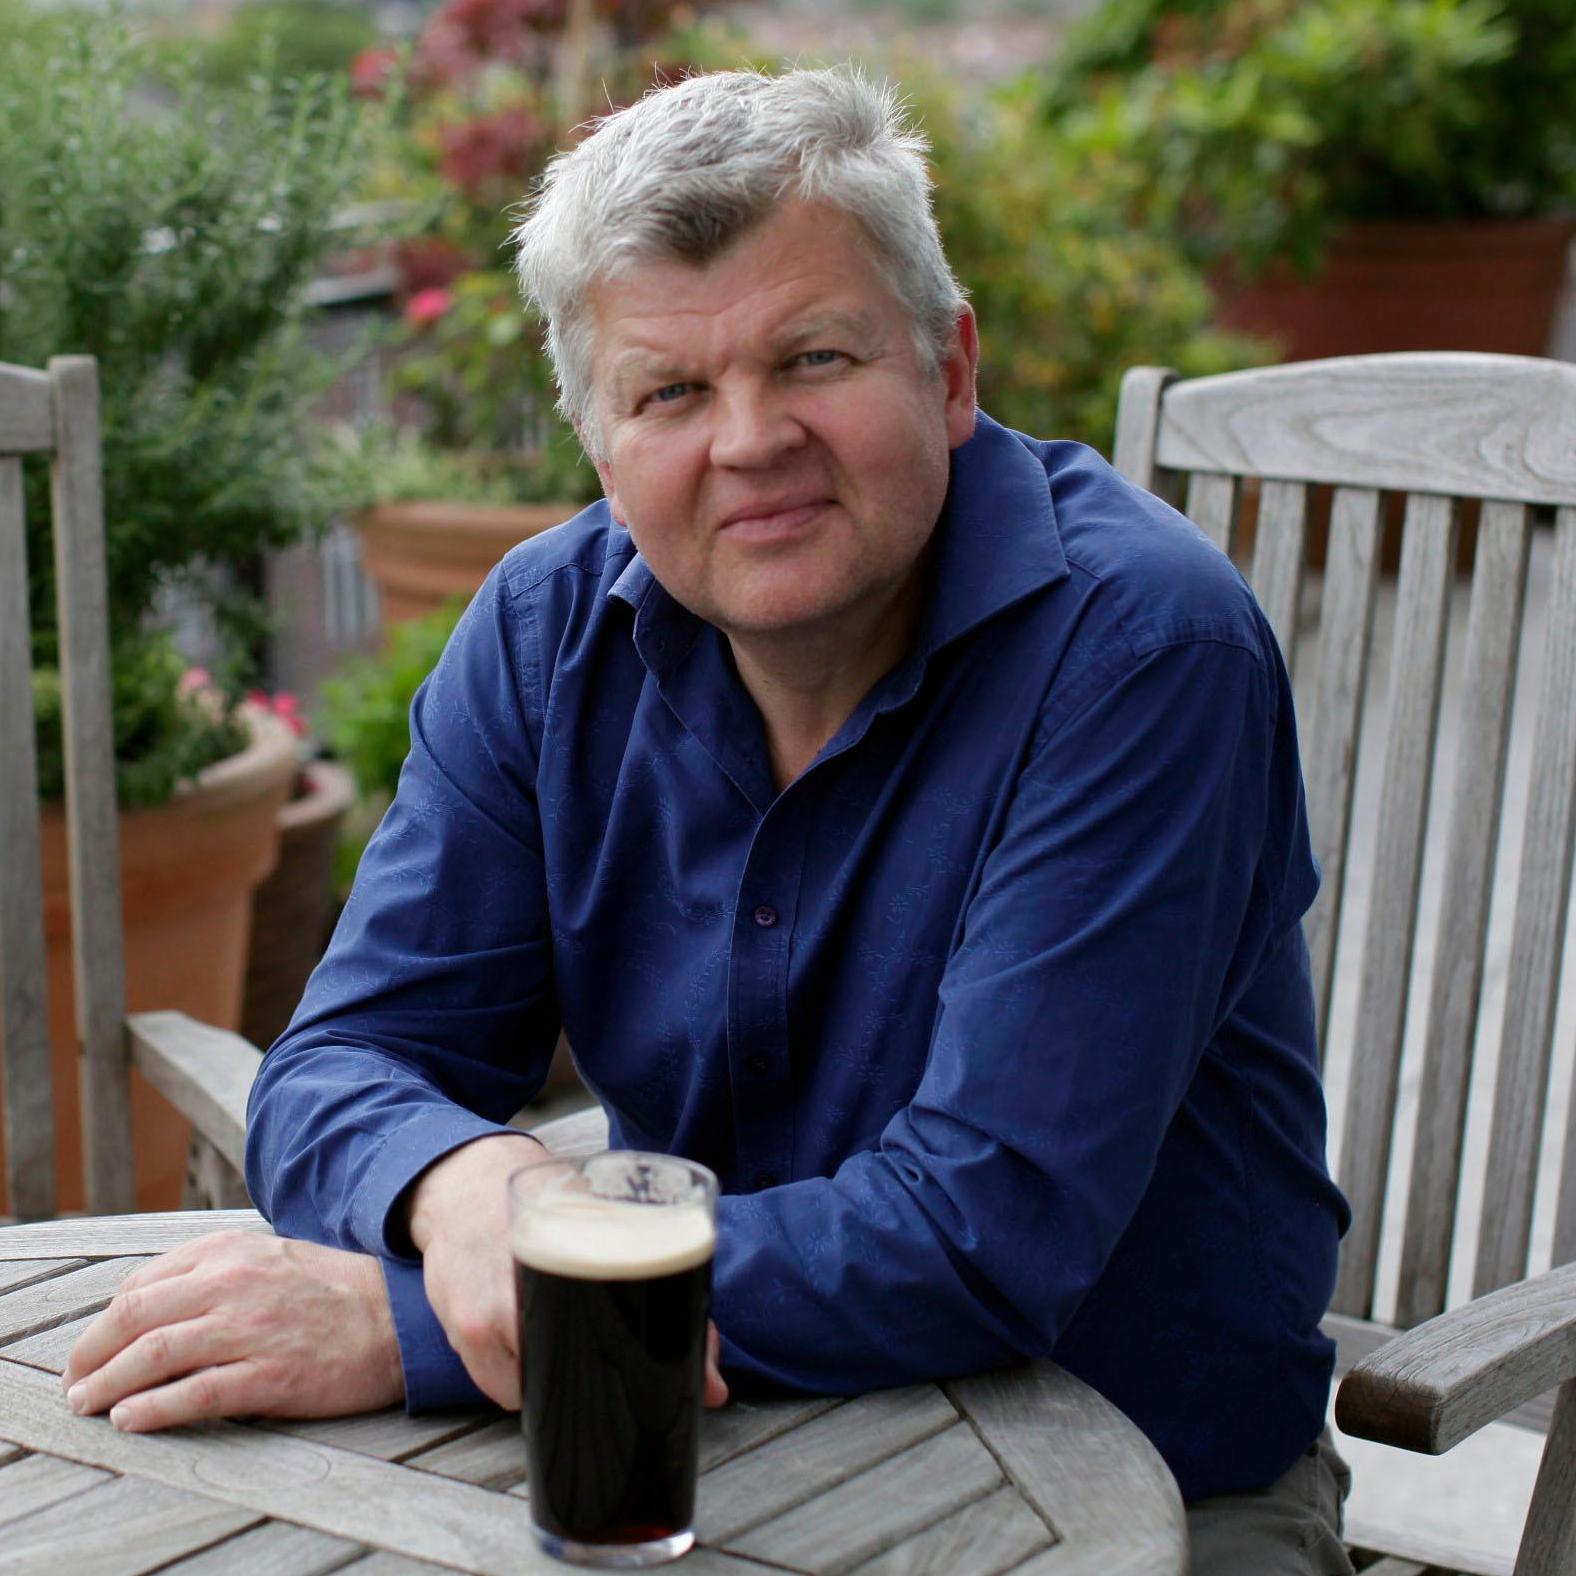 How tall is Adrian Chiles?